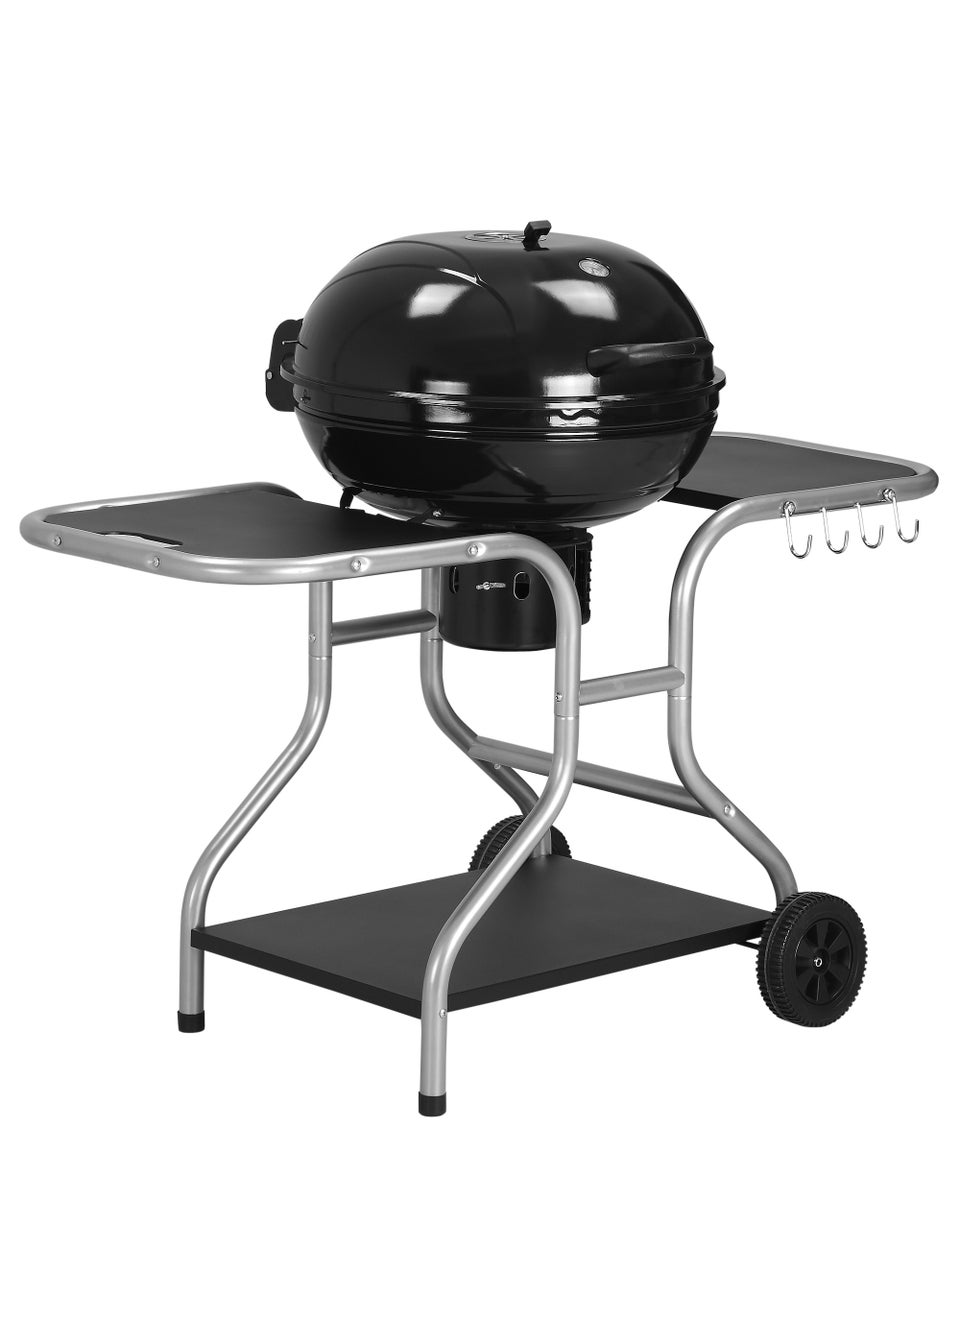 Outsunny Charcoal Trolley Barbecue Grill with Wheels (126cm x 52cm x 96cm)